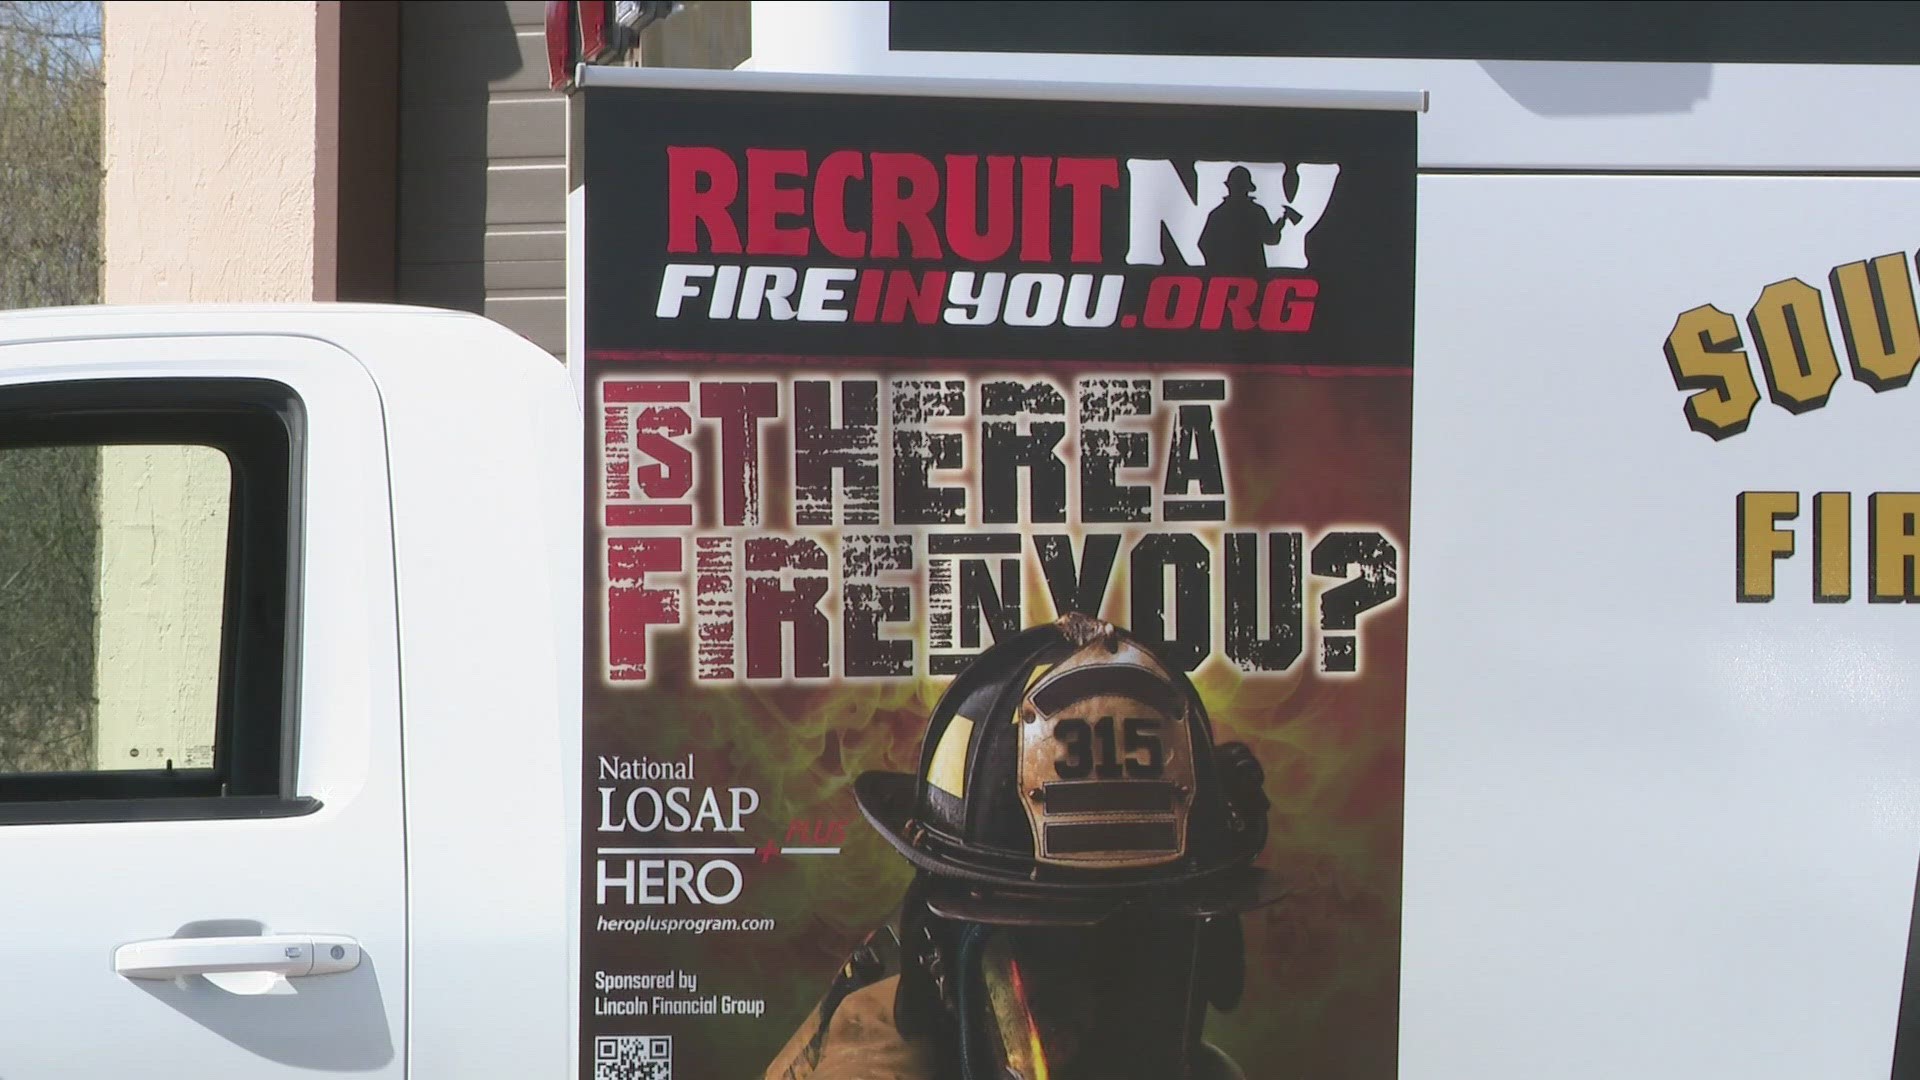 FIREFIGHTERS ASSOCIATIONS OF NEW YORK HAVE BEGUN A STATEWIDE EFFORT TO INCREASE THE NUMBER OF VOLUNTEER FIREFIGHTERS.